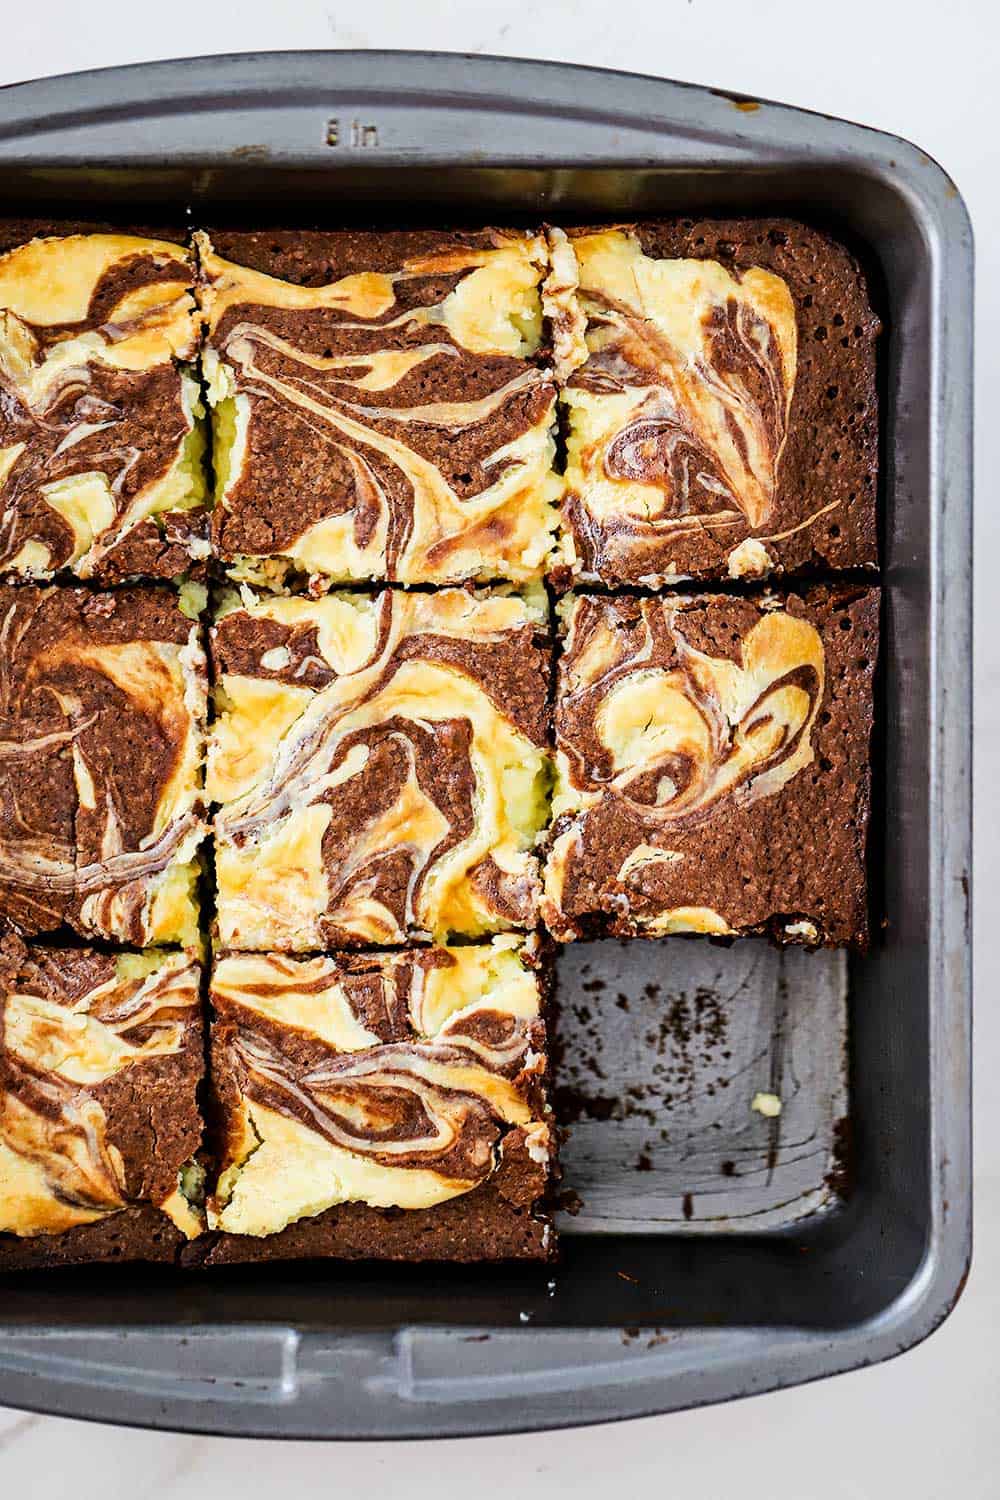 A metal pan filled with chocolate and cheesecake brownies that have been cut into squares and one brownie is missing.